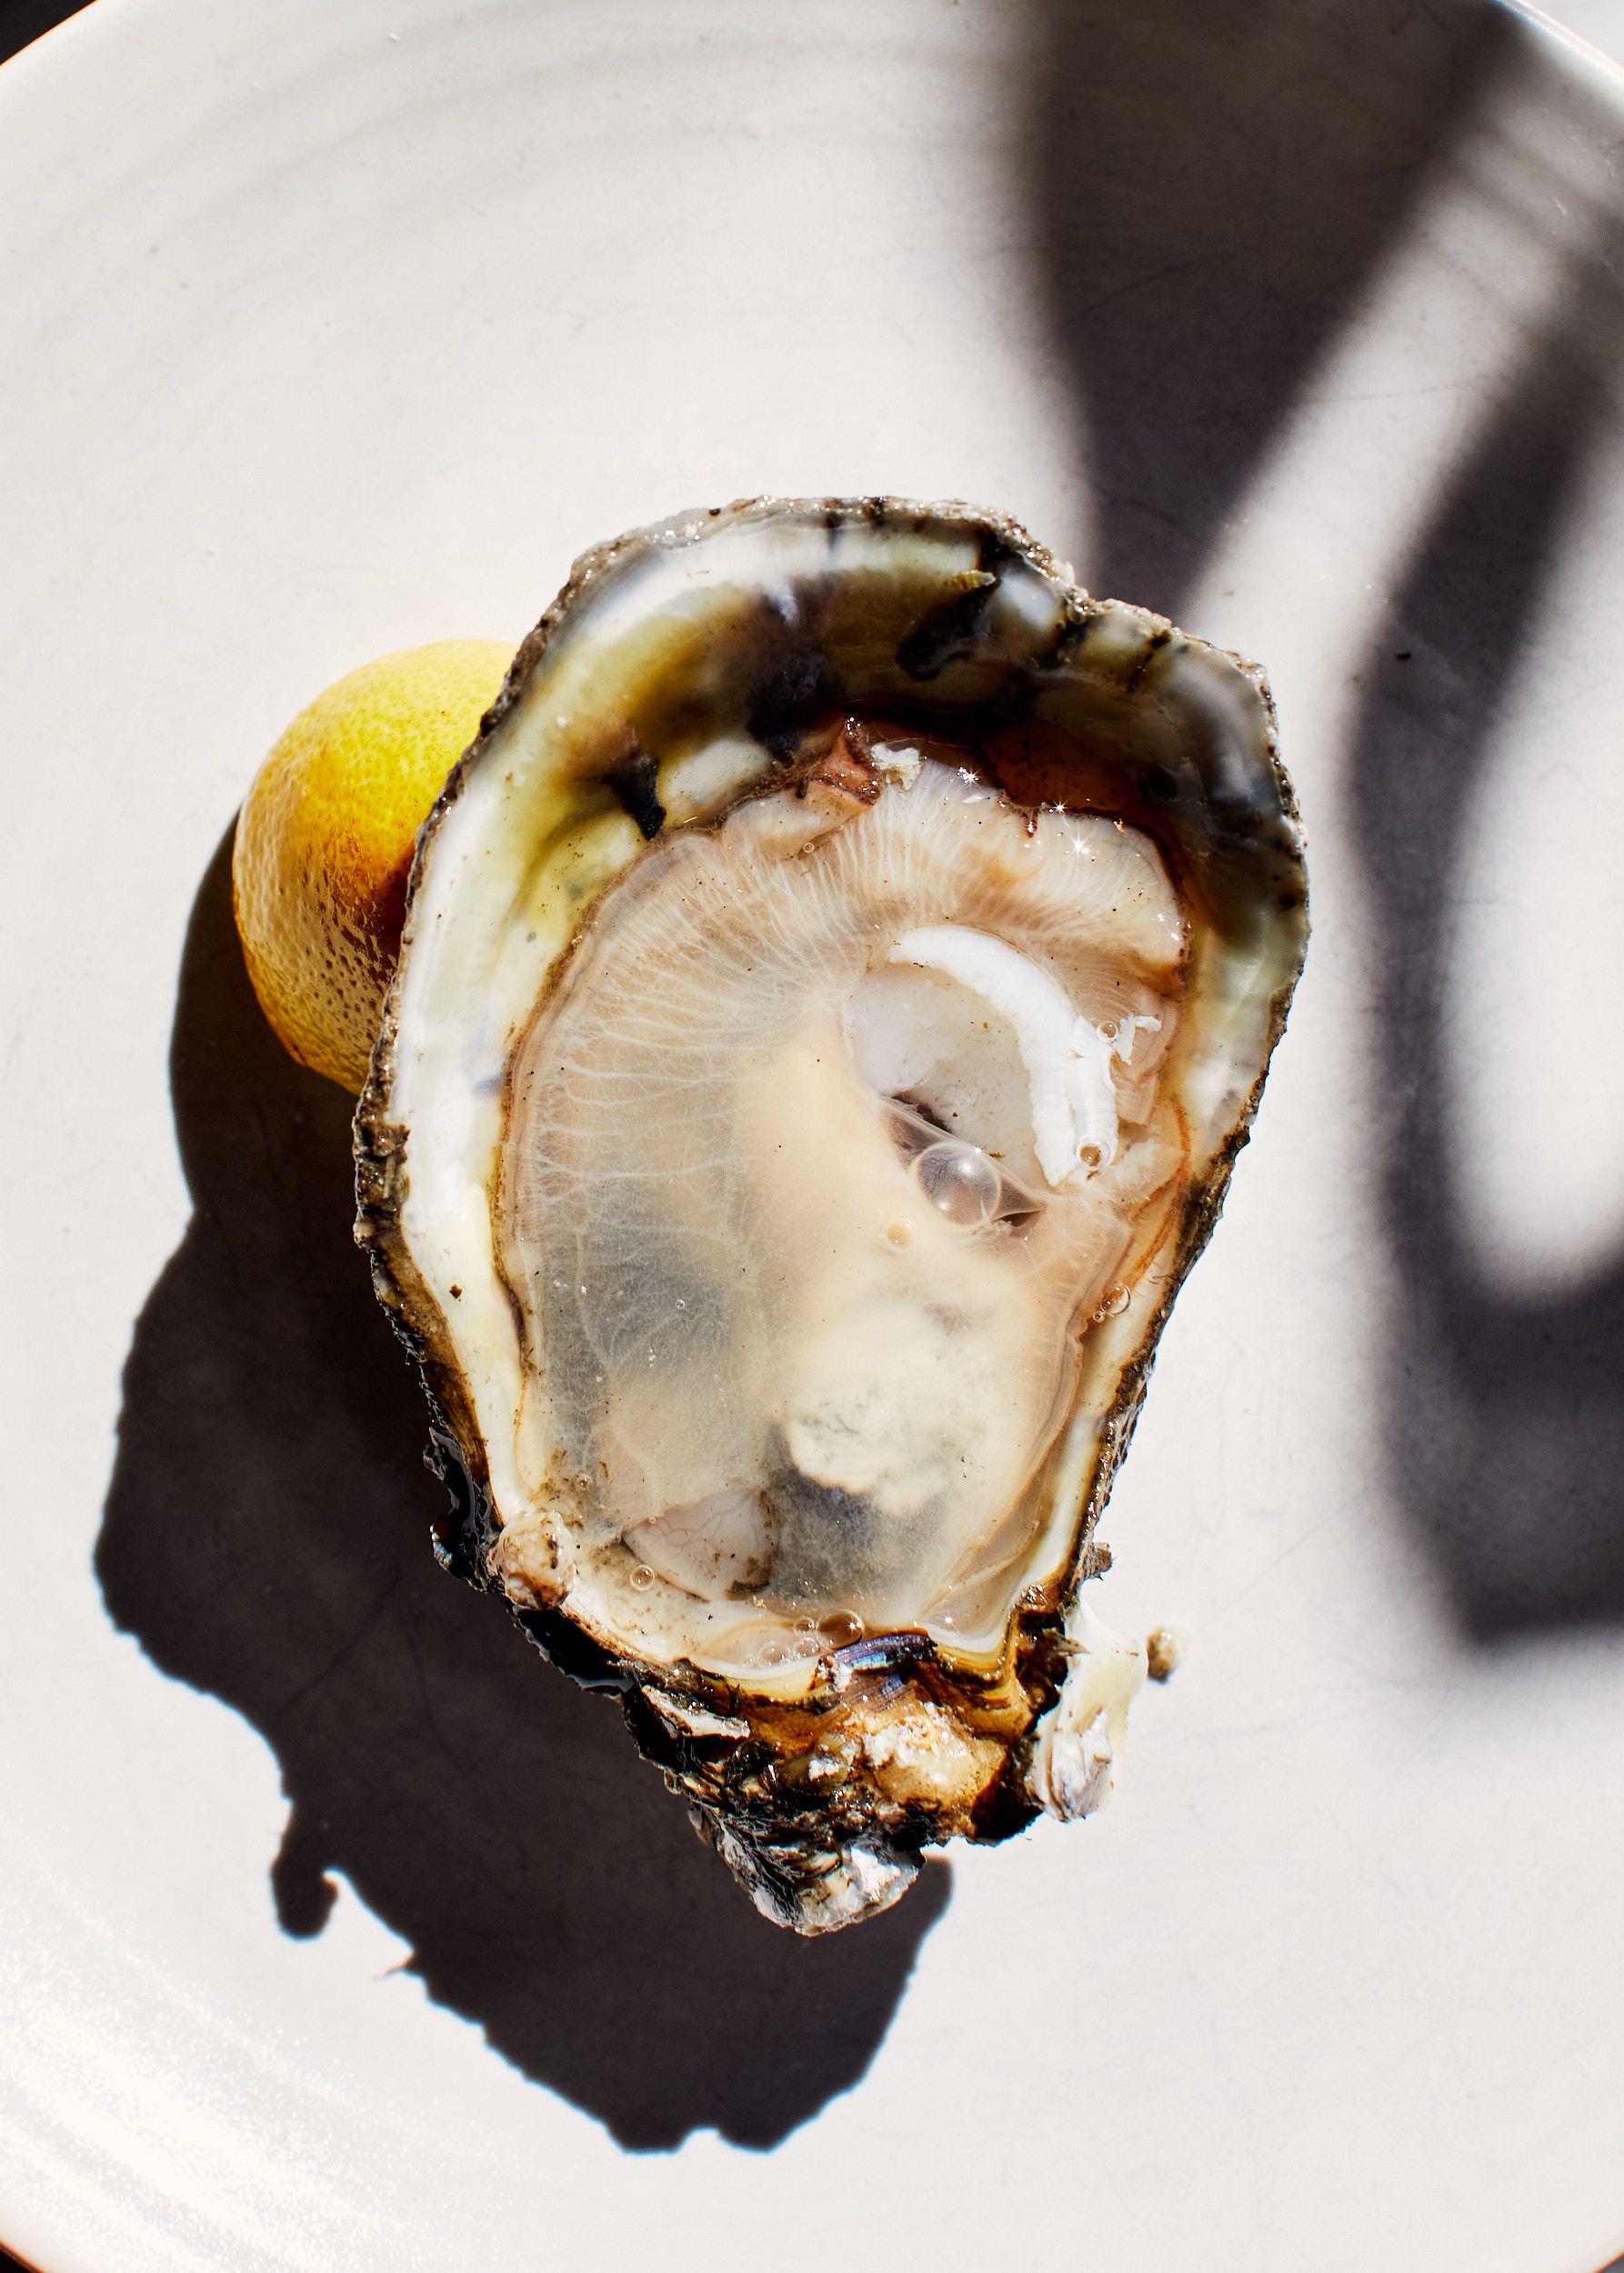 Oyster and lemon in New Orleans, LA